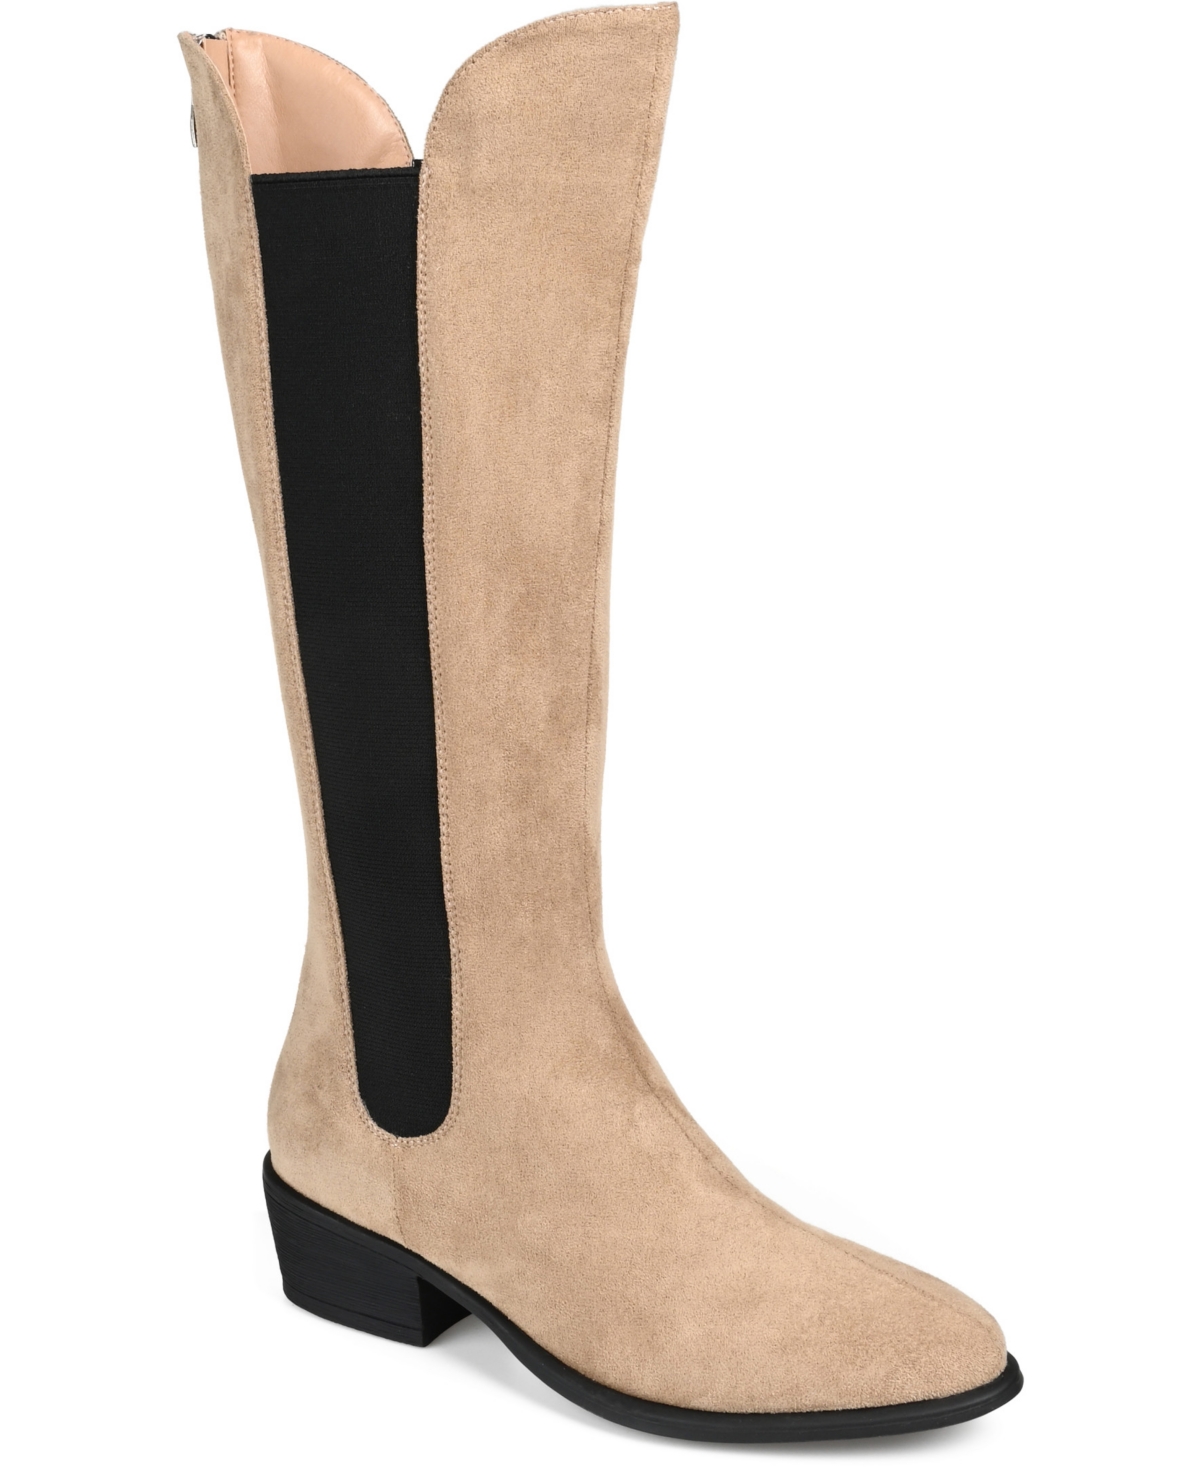 Women's Celesst Wide Calf Boots - Taupe